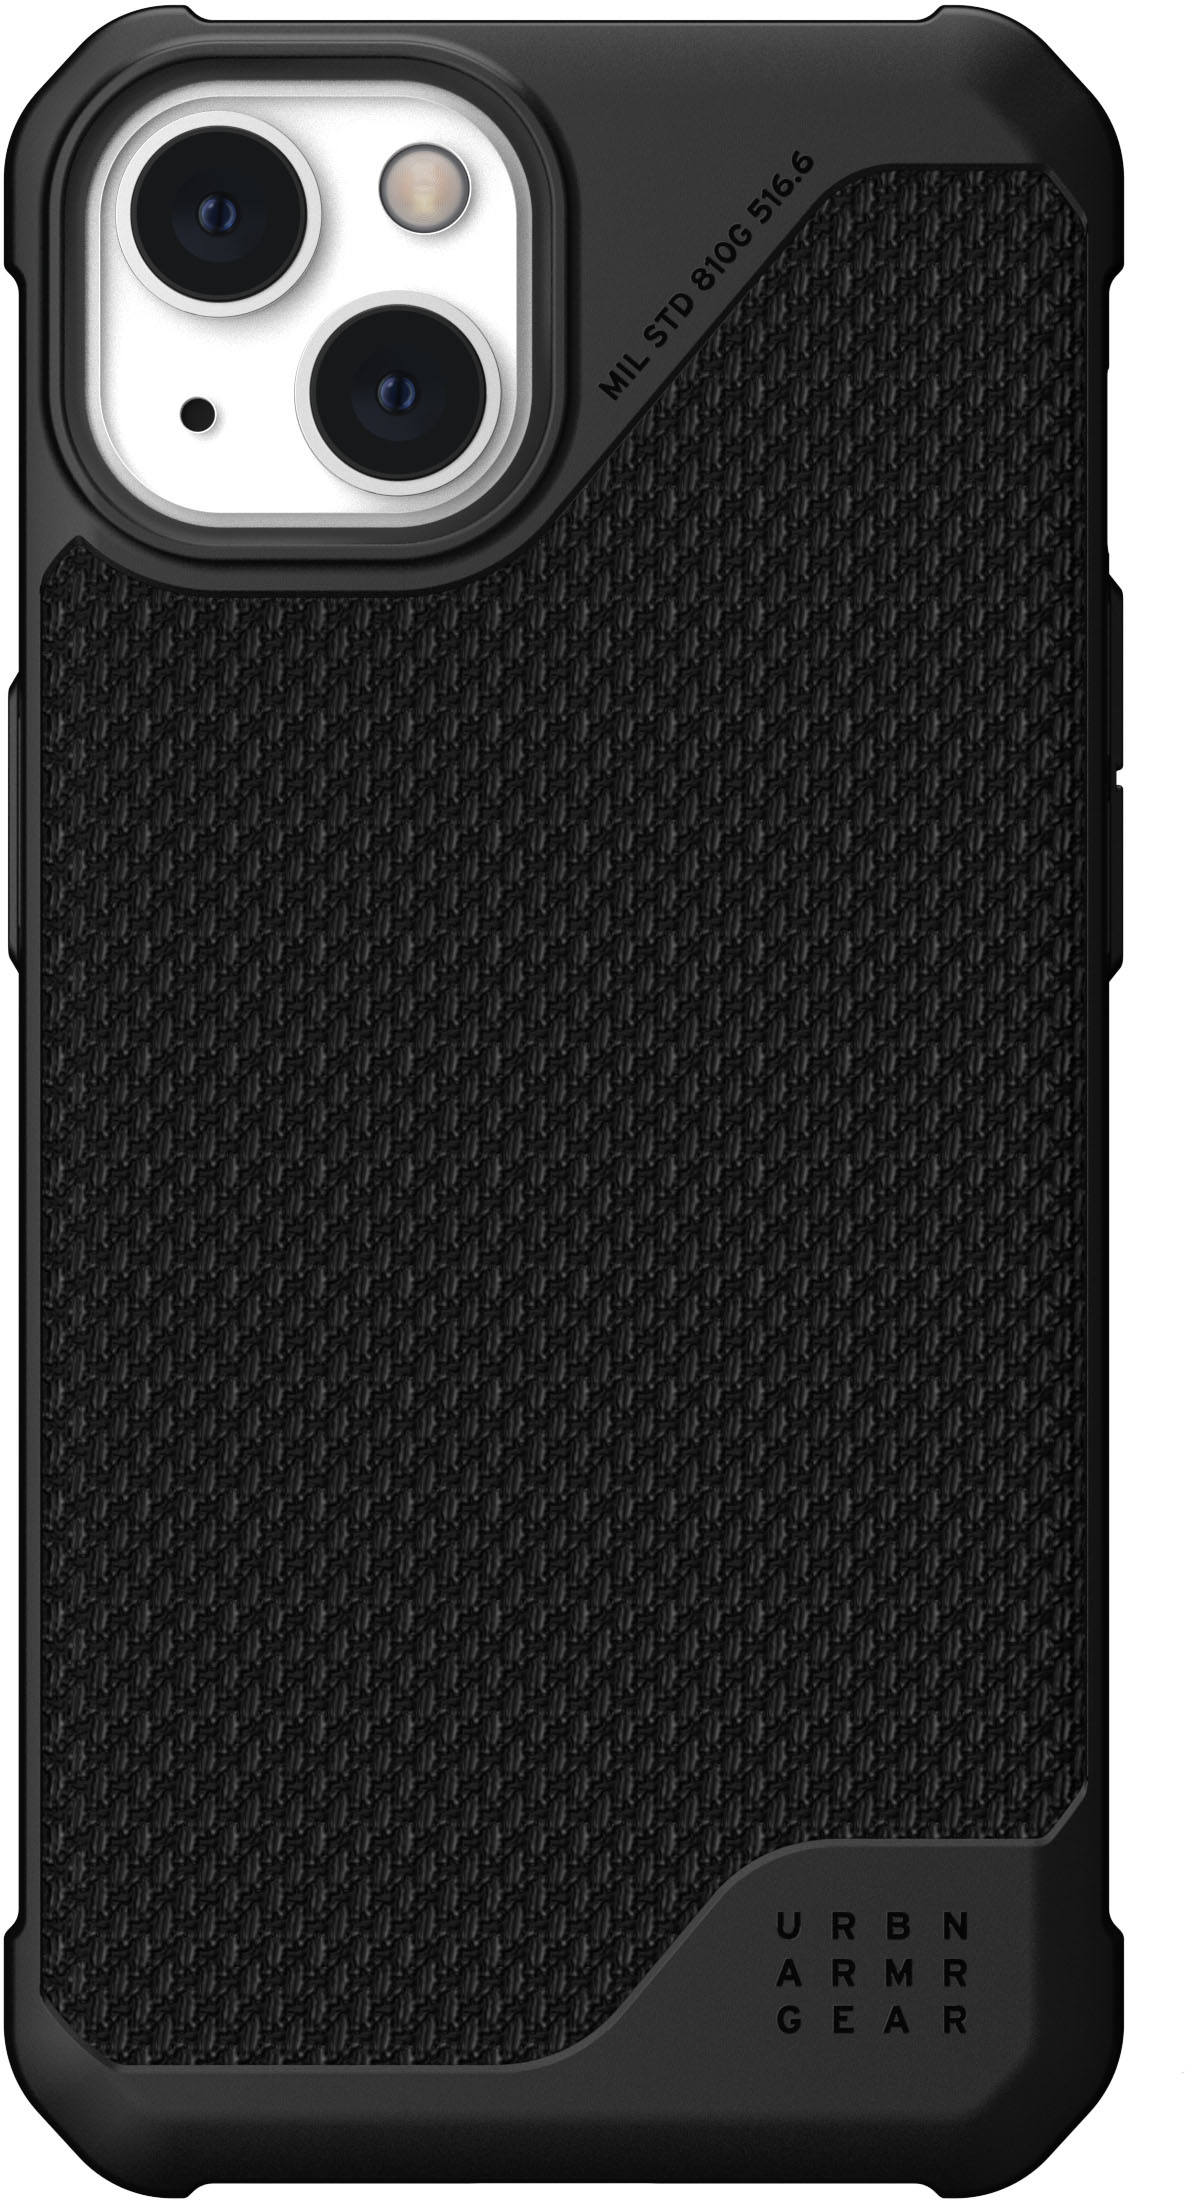 Angle View: UAG - Metropolis LT MAGSAFE Case for iPhone 13 - Black